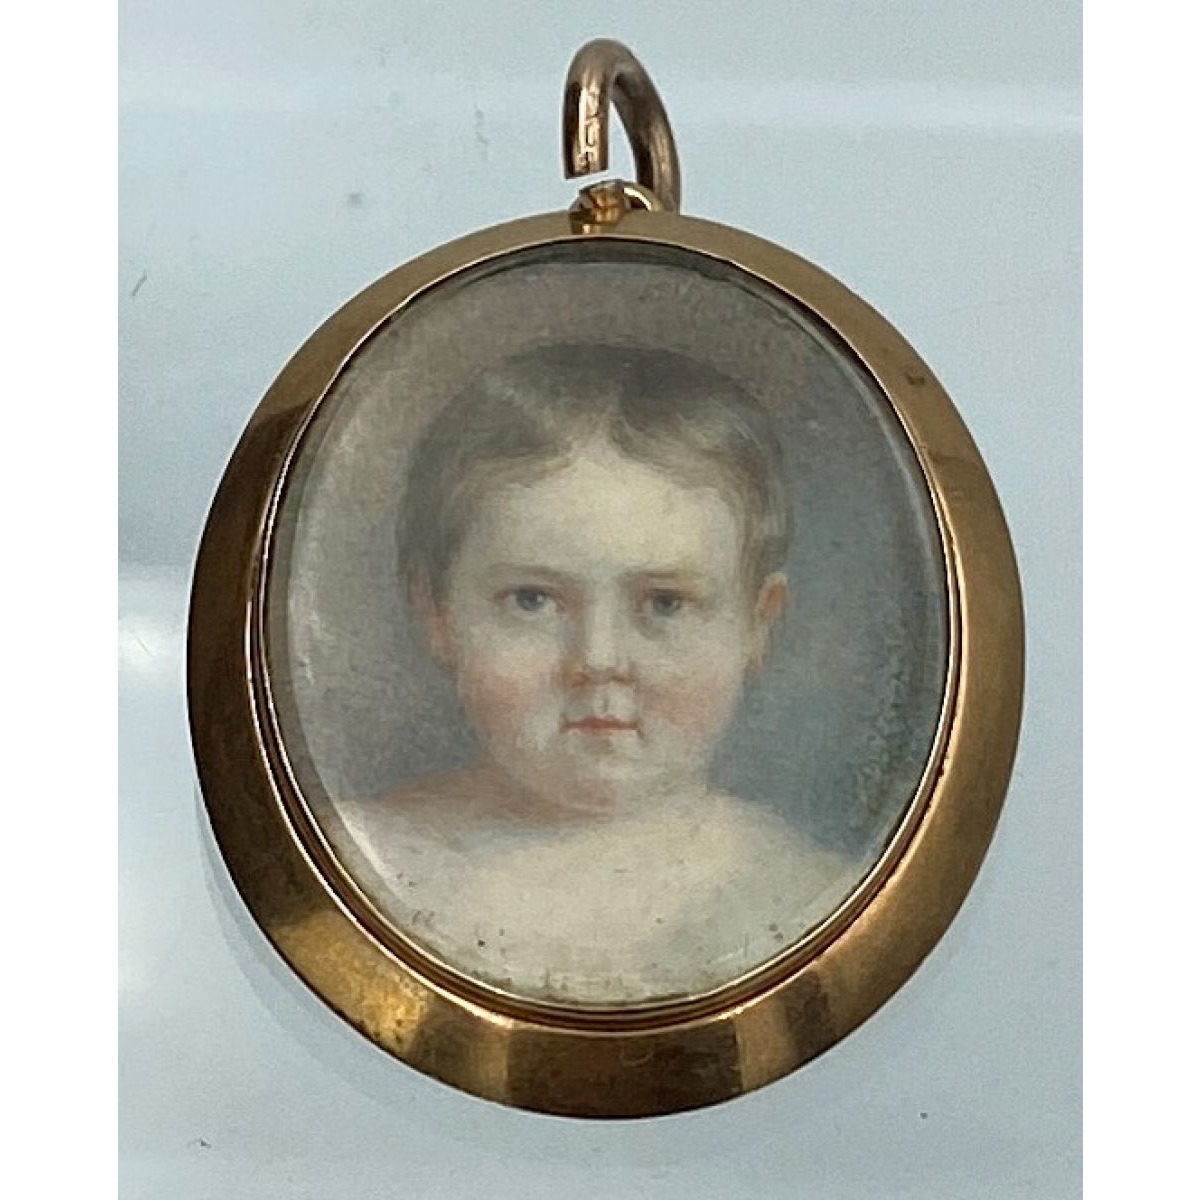 Hand-Painted Miniature Portrait in a Rose Gold Locket, Antique English Gold Pendant